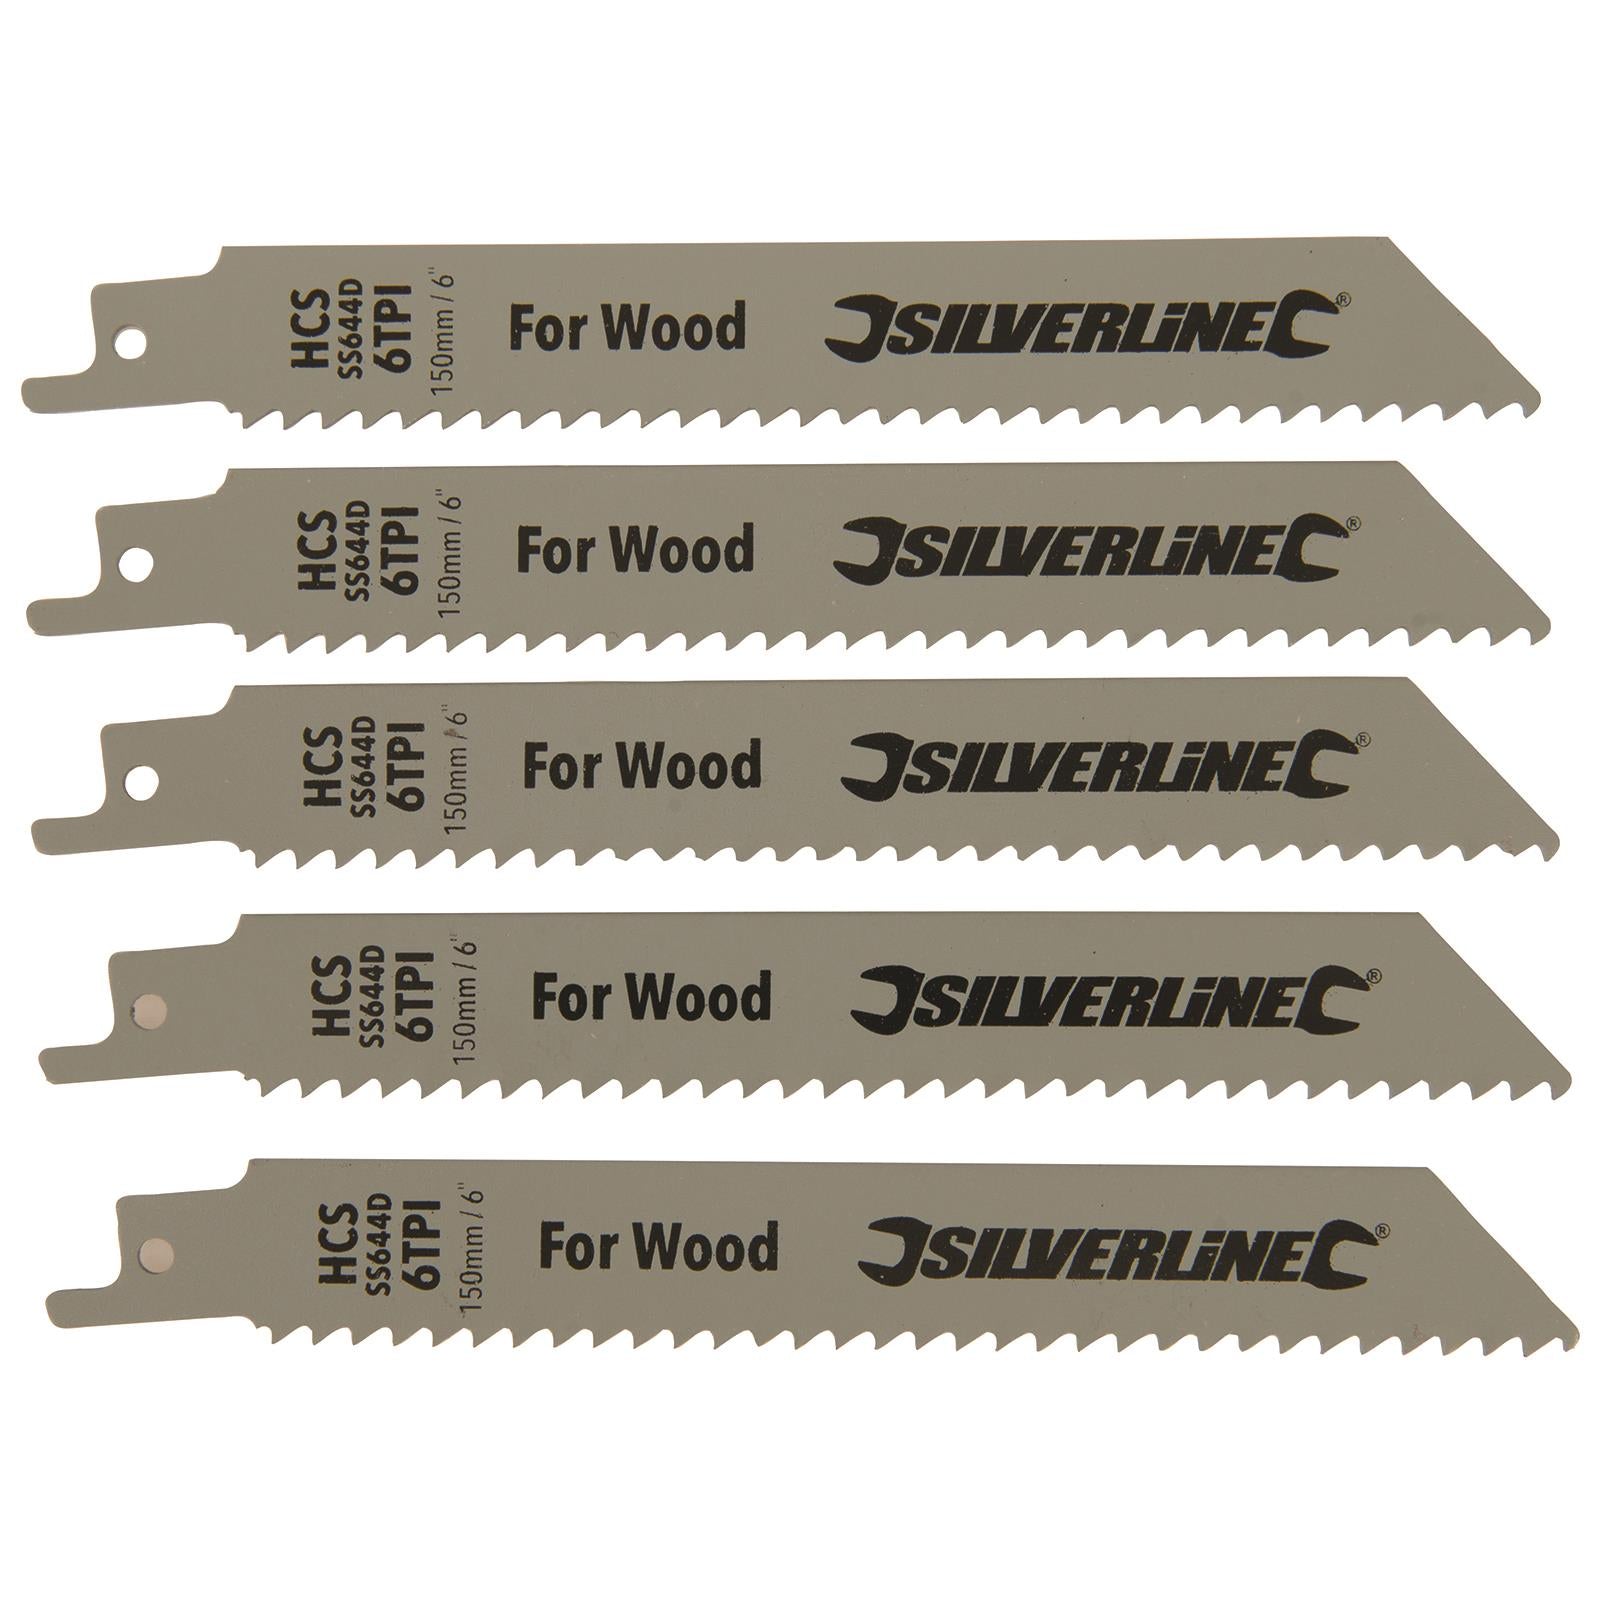 Silverline Recip Saw Blades for Wood HCS 5 Pack 6 TPI 150mm Cutting Blades